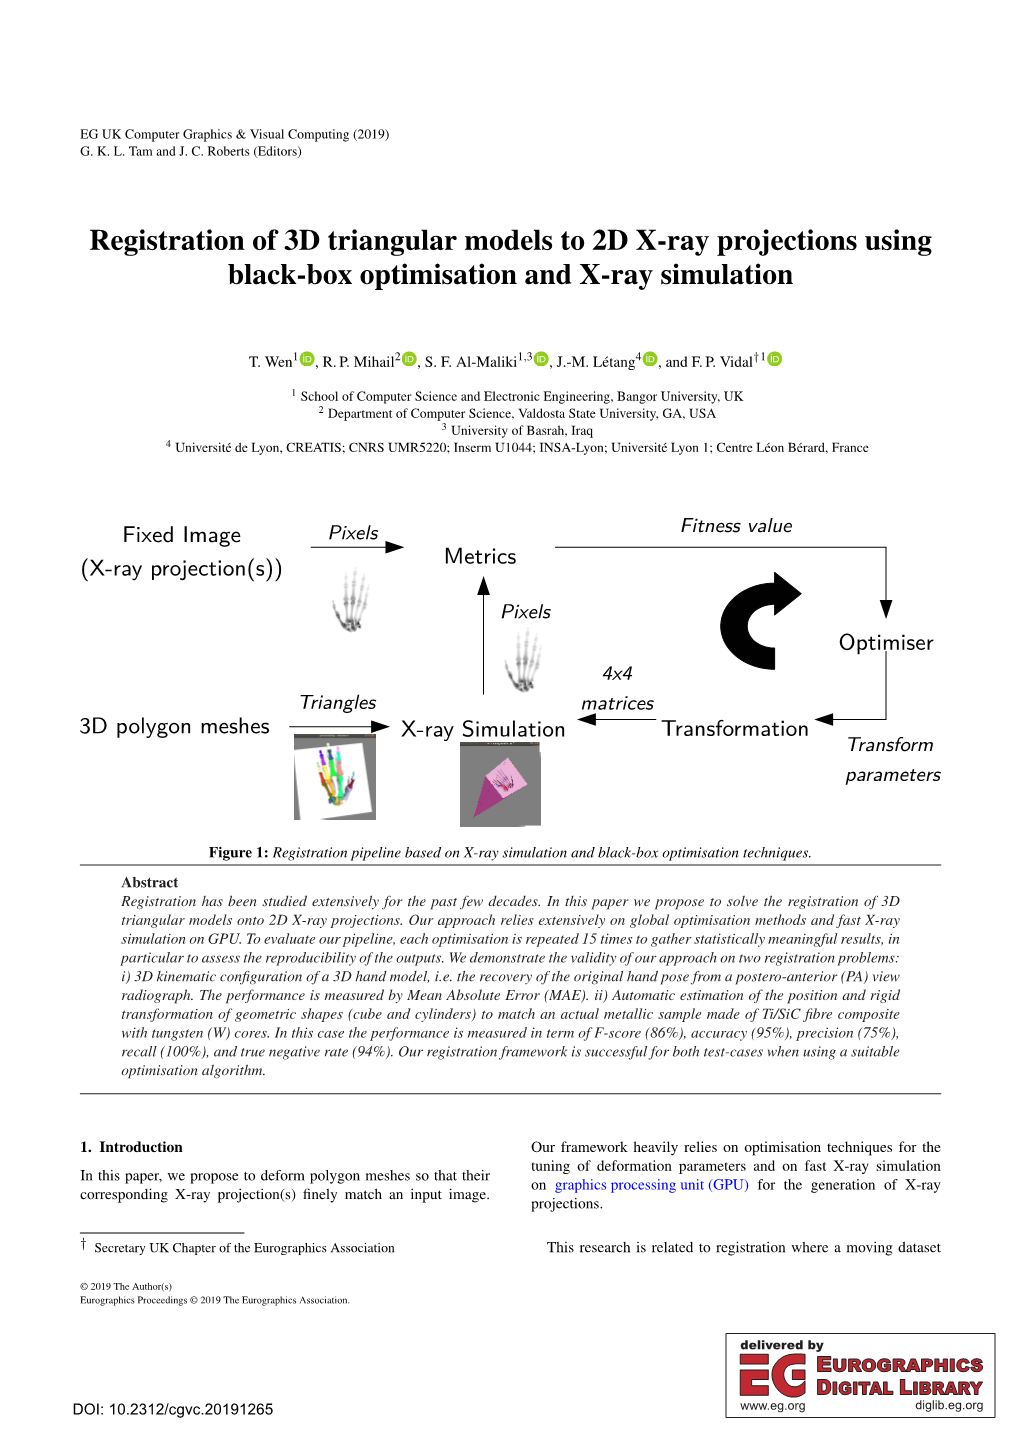 Registration of 3D Triangular Models to X-Ray Projections